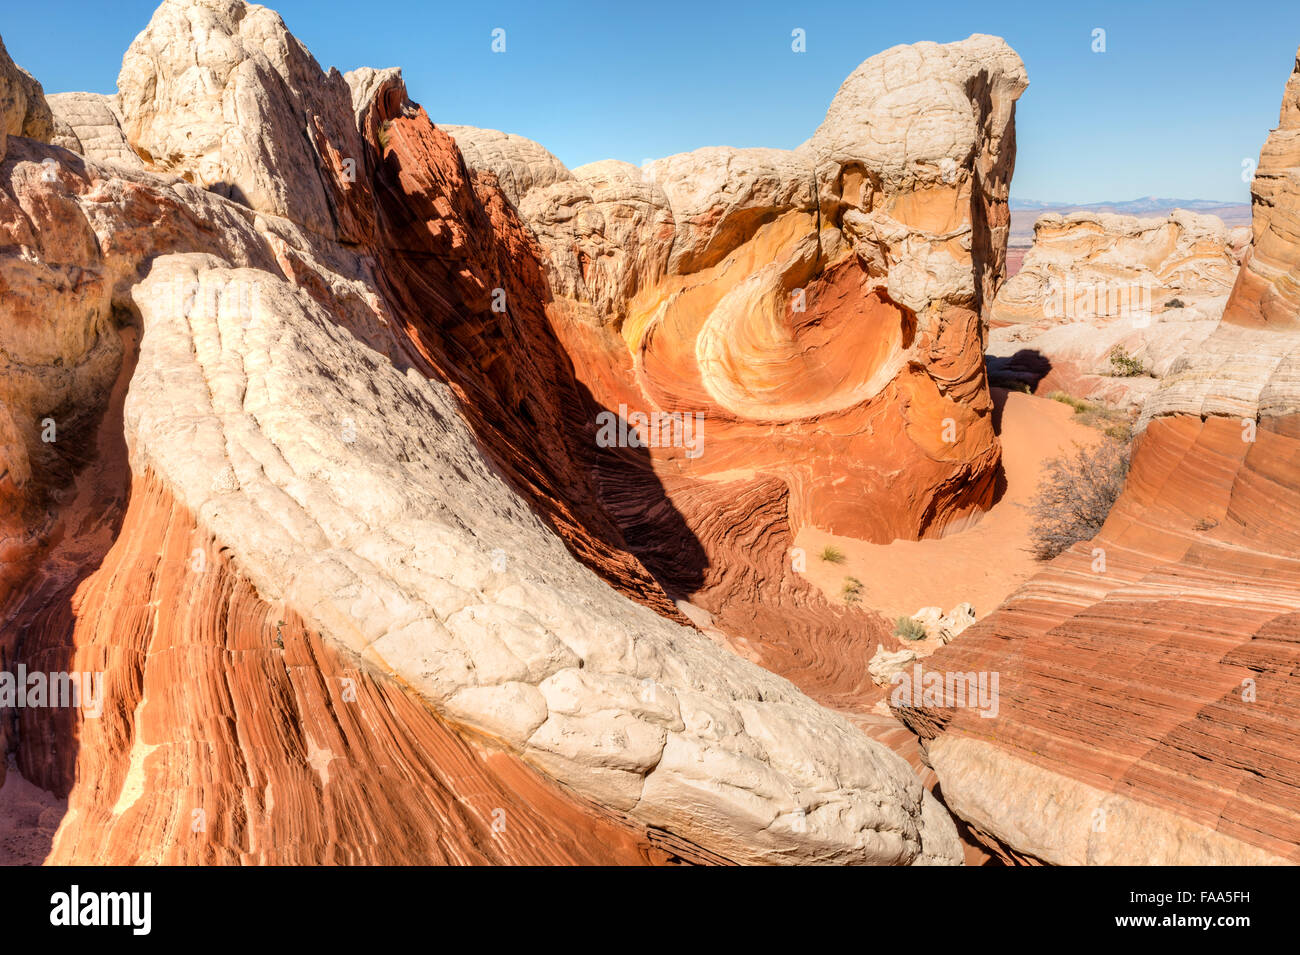 A multi-colored rock formation called 'The Vortex' in the unique White Pocket rock formations in Vermillion Cliffs N.M. Stock Photo